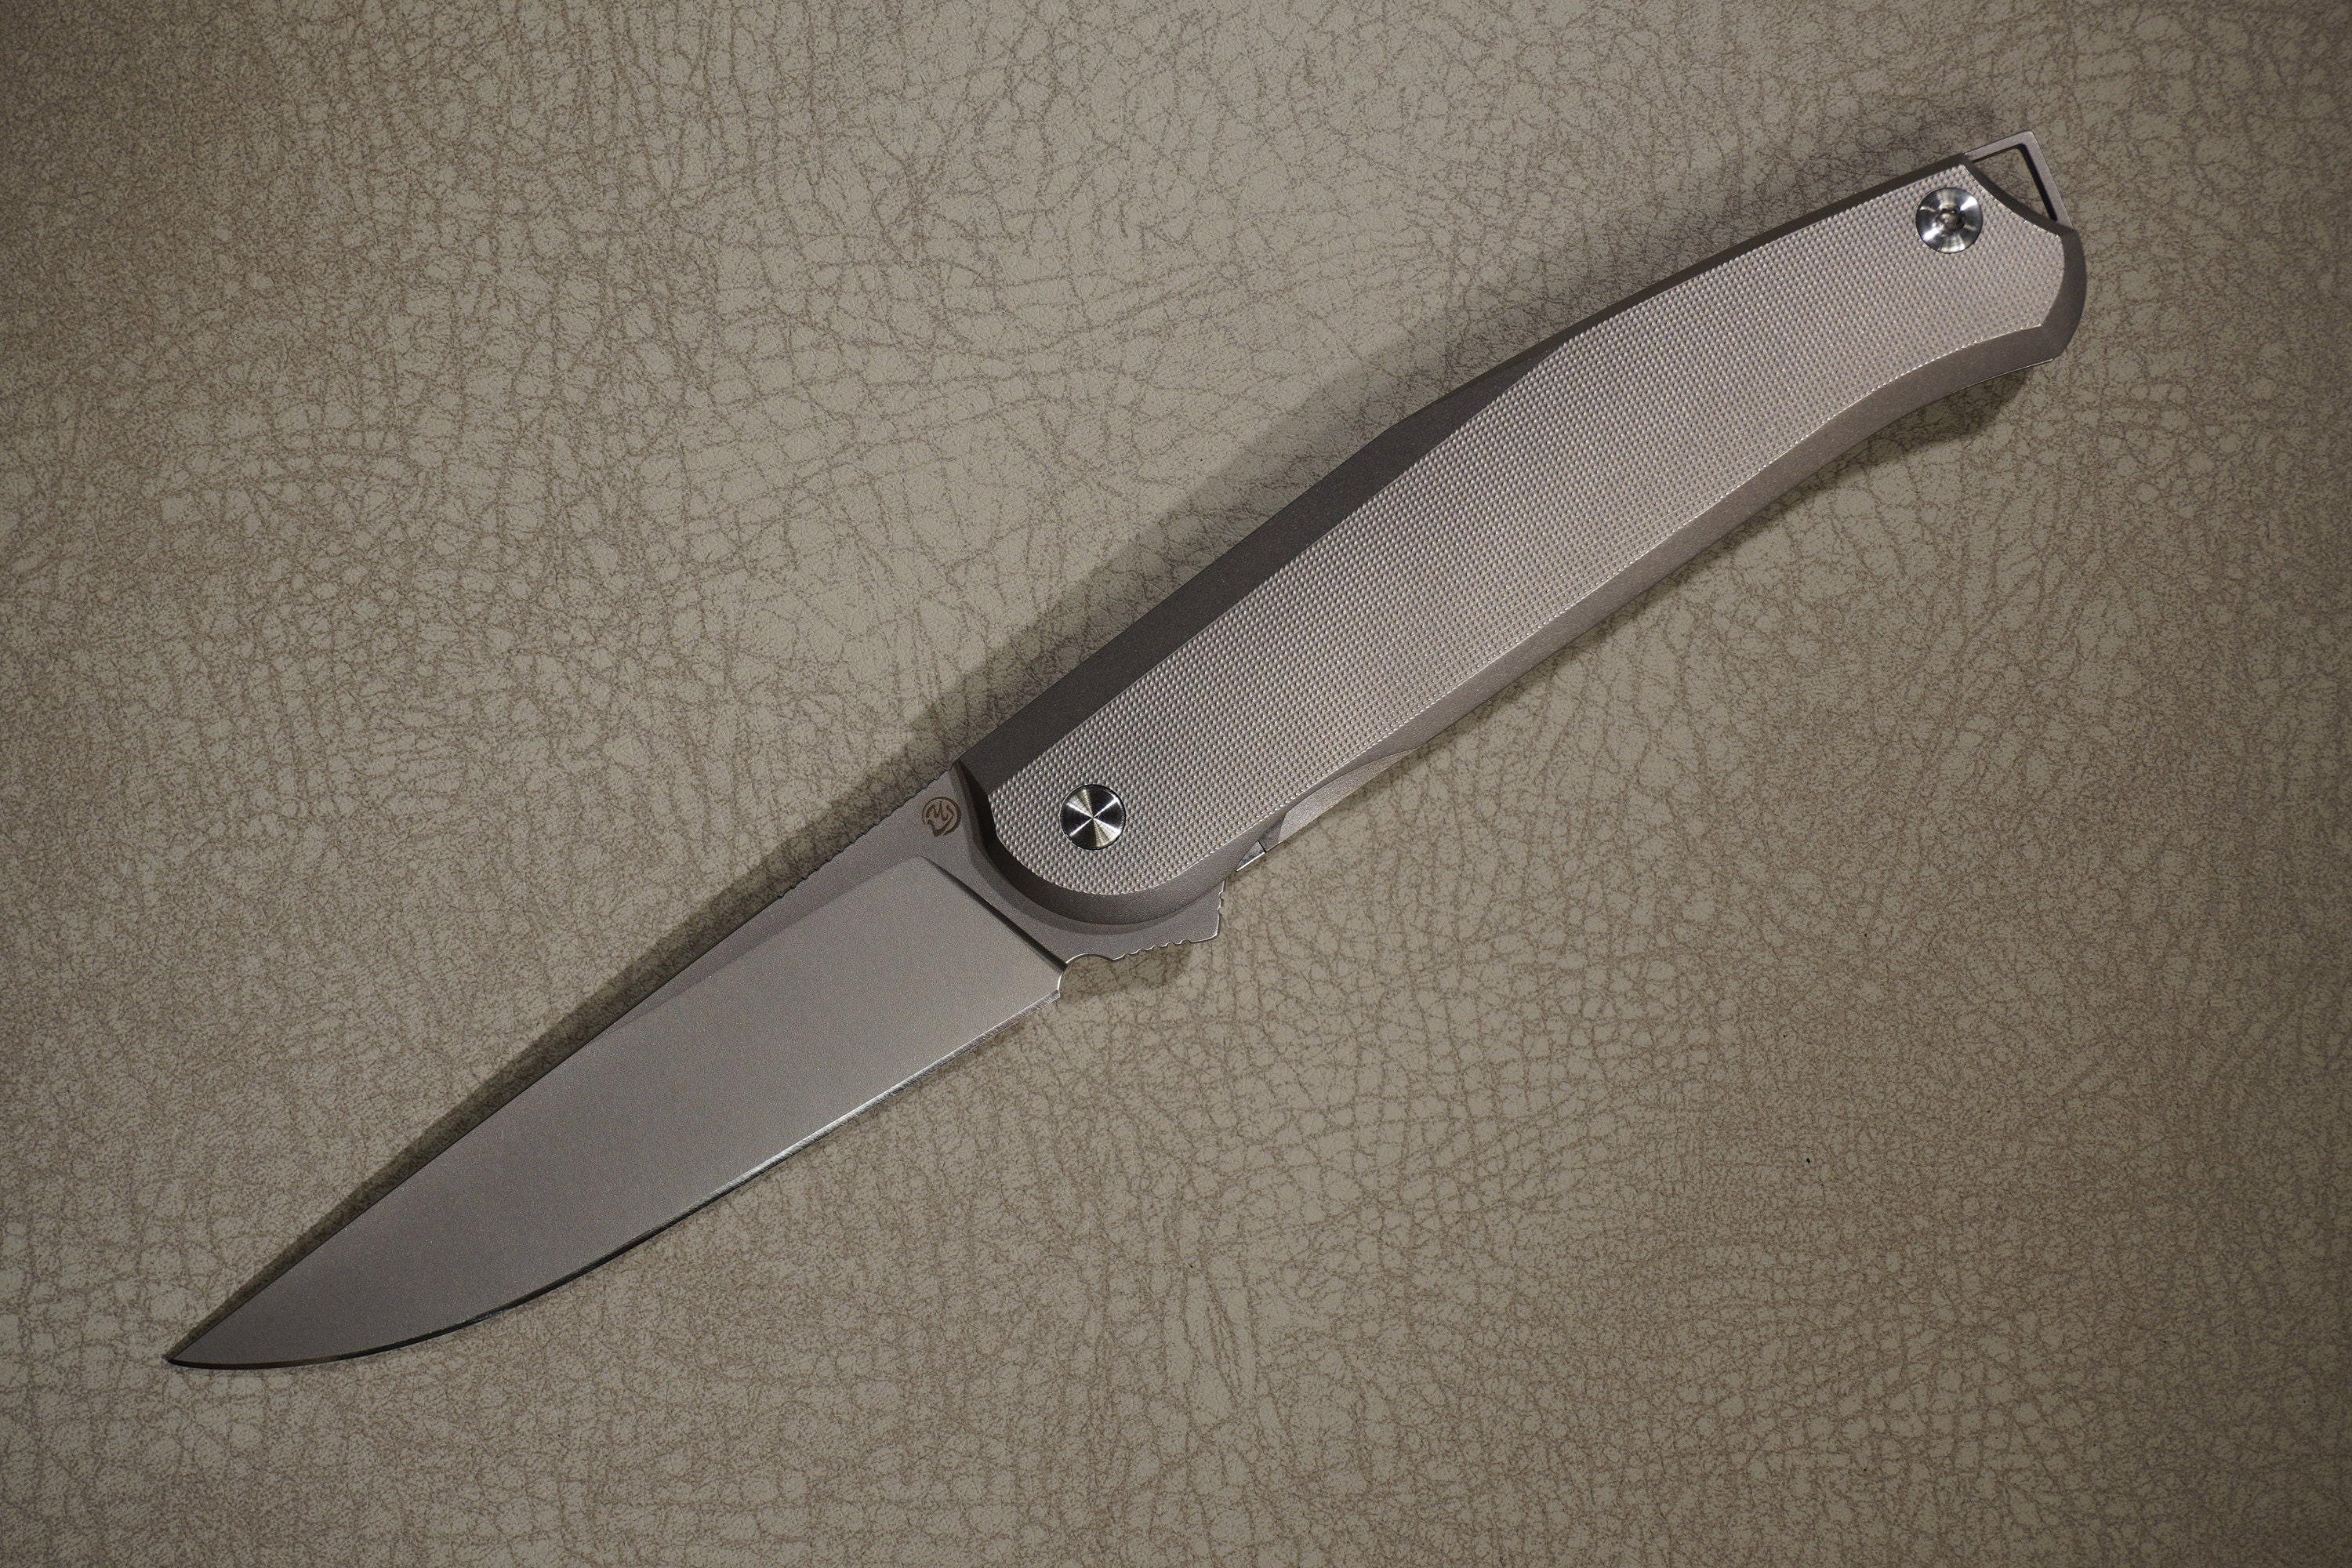 Knife Blade Steels used in Crazy Crow Knife Blades